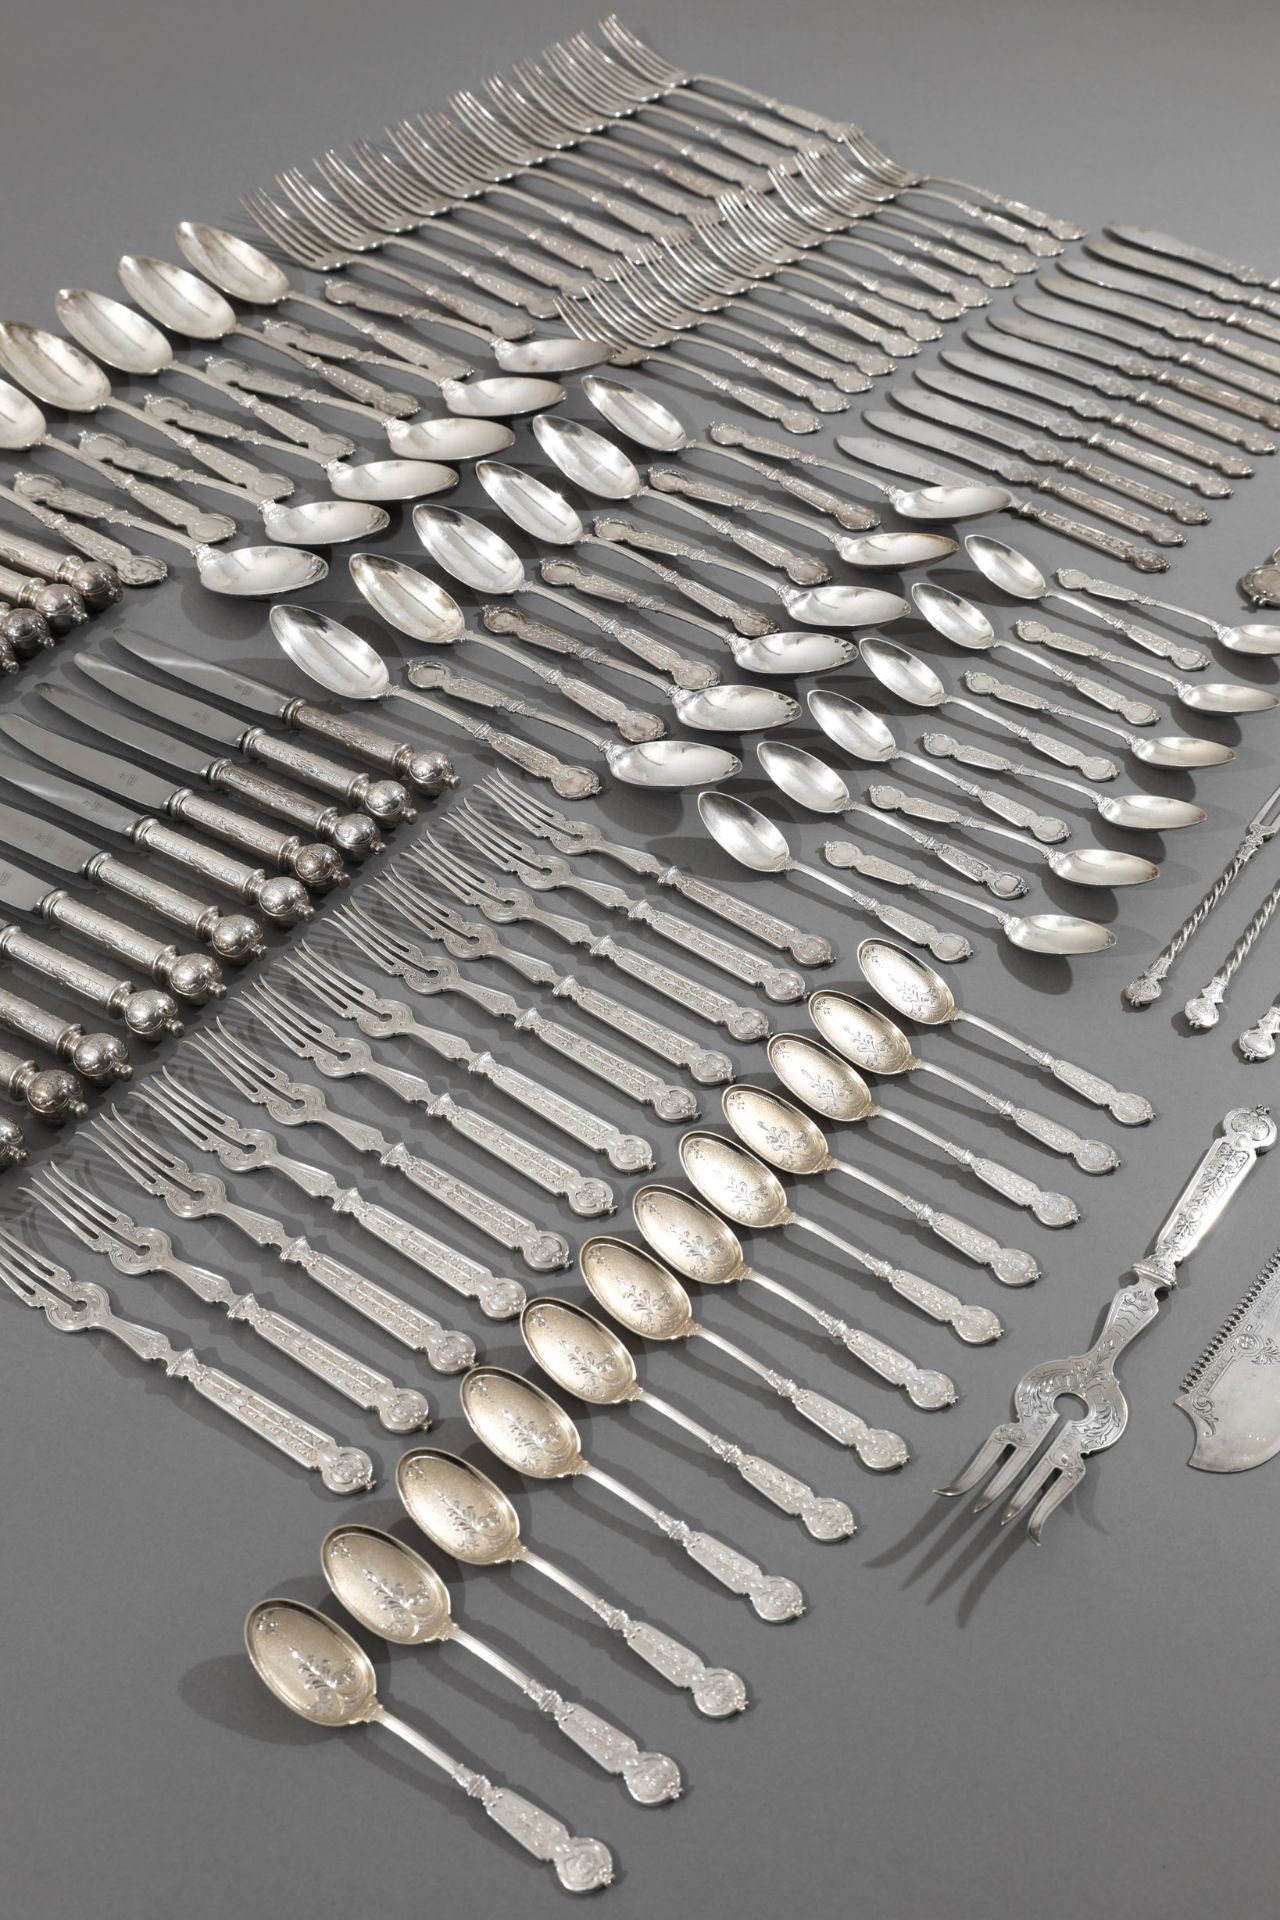 G. Hermeling for Wilkens Söhne, Bremen, 118-piece cutlery set with serving pieces - Image 3 of 11